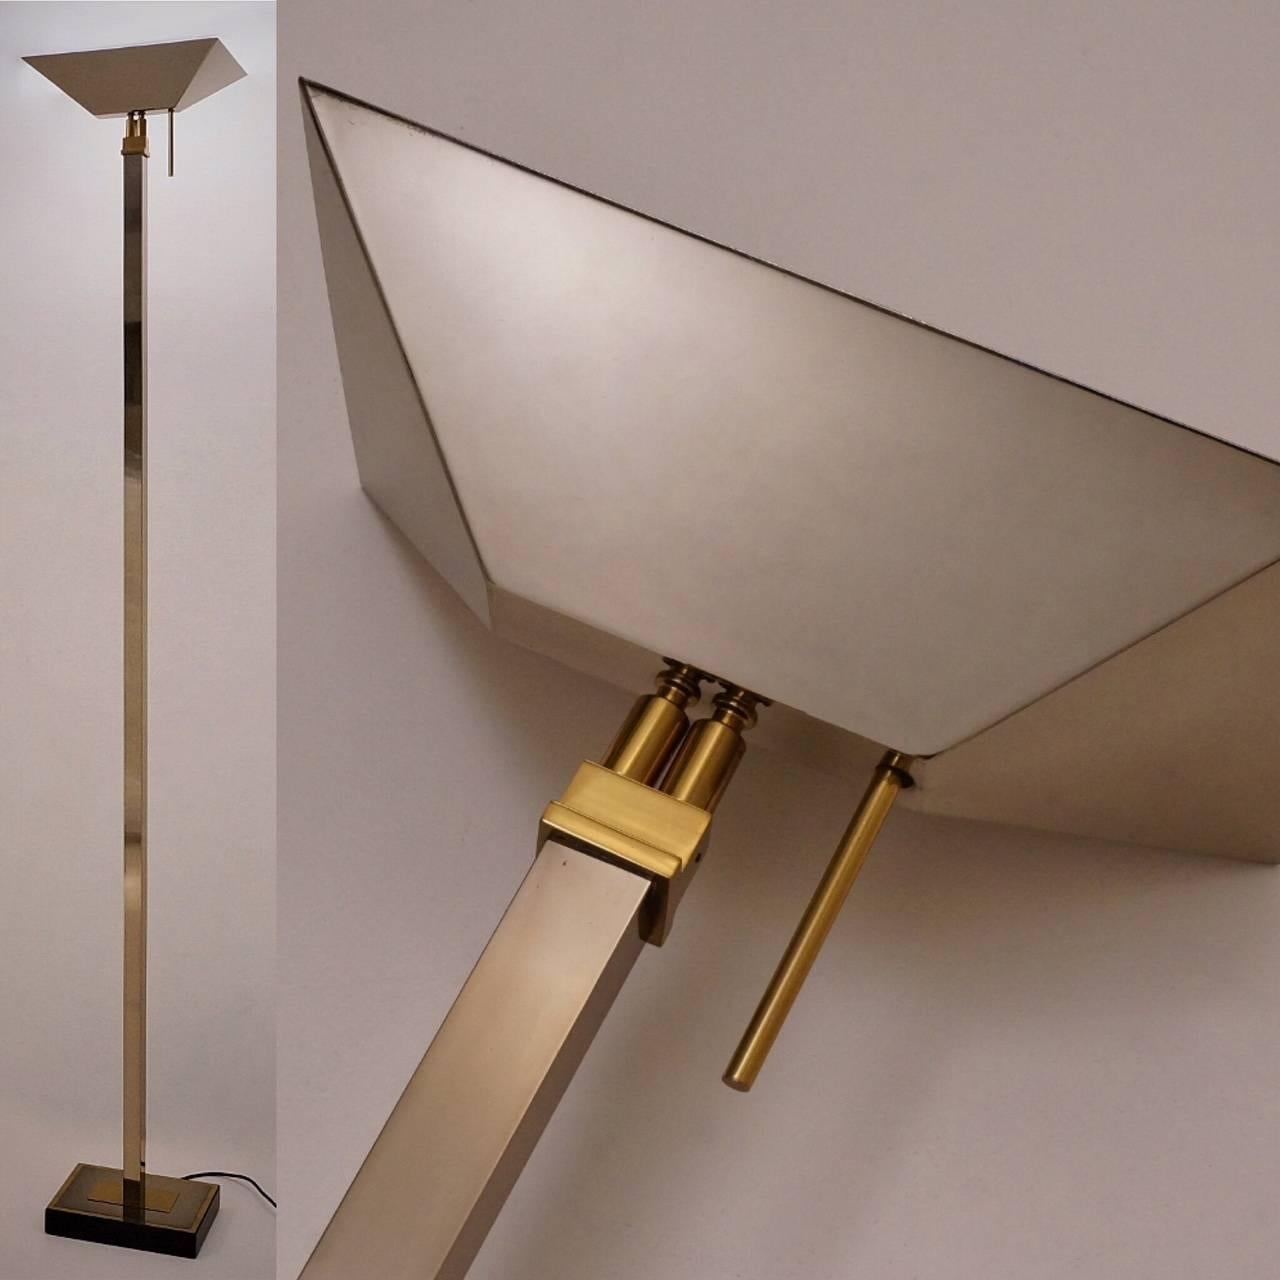 Chrome & brass floor lamp with halogen uplighter by Deknudt Lighting, circa 1970s, Belgian.

This vintage floor lamp has been gently cleaned while respecting the antique patina. It is rewired, earthed & ready to use. This lamp is compatible with